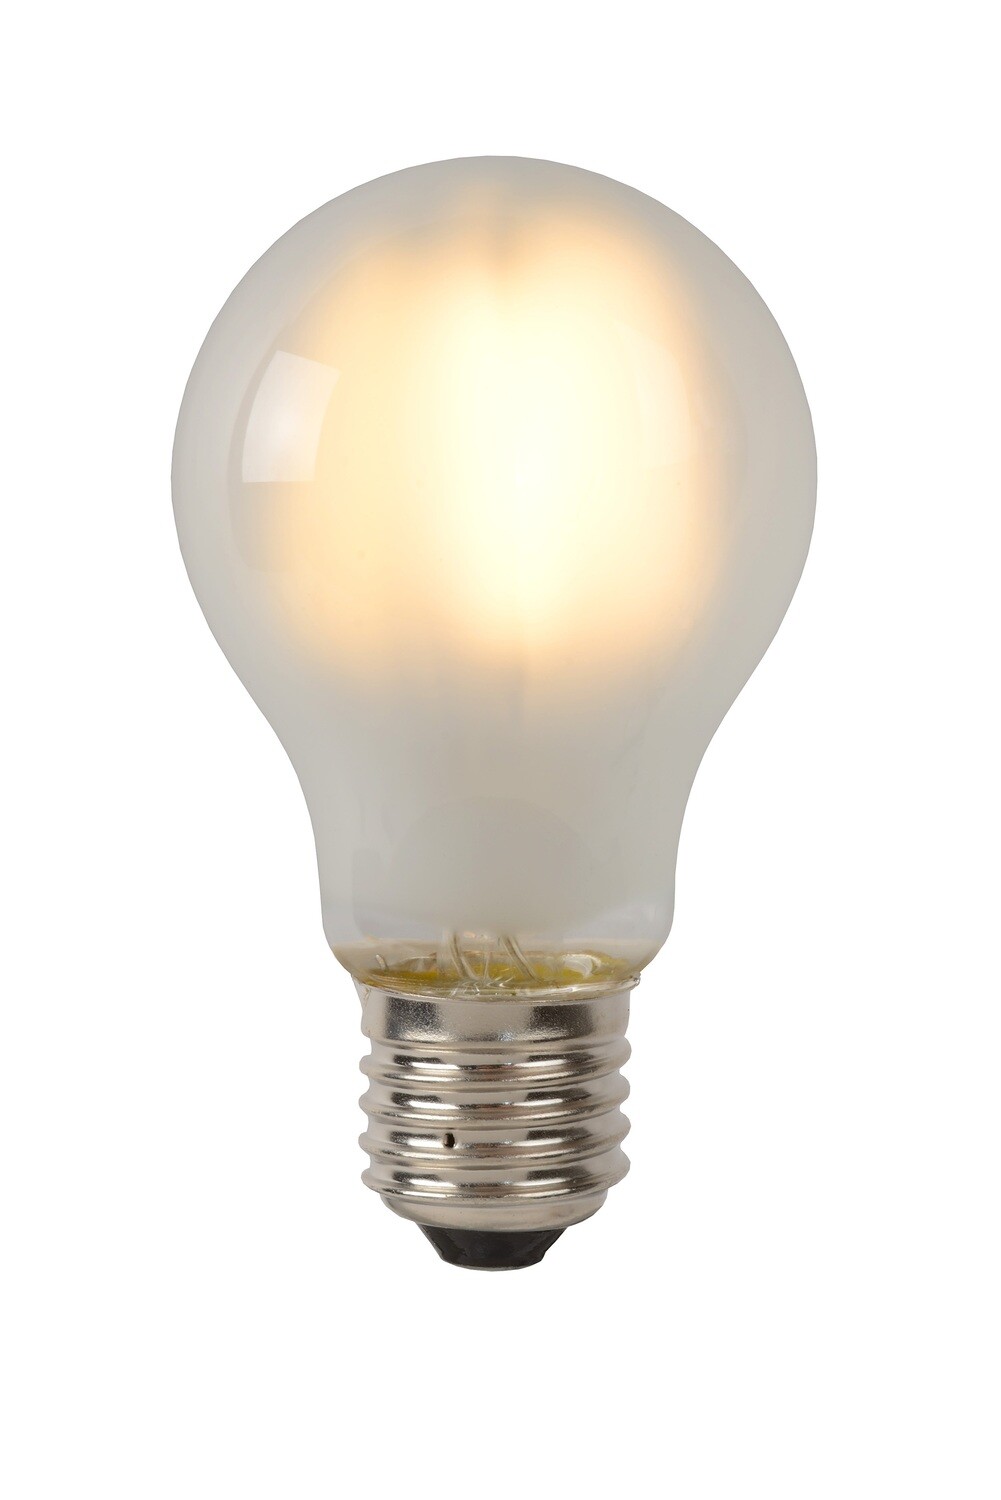 E27-LED filament-A60 5 Watt 2700K (warm white) 500lm frosted DIMMABLE